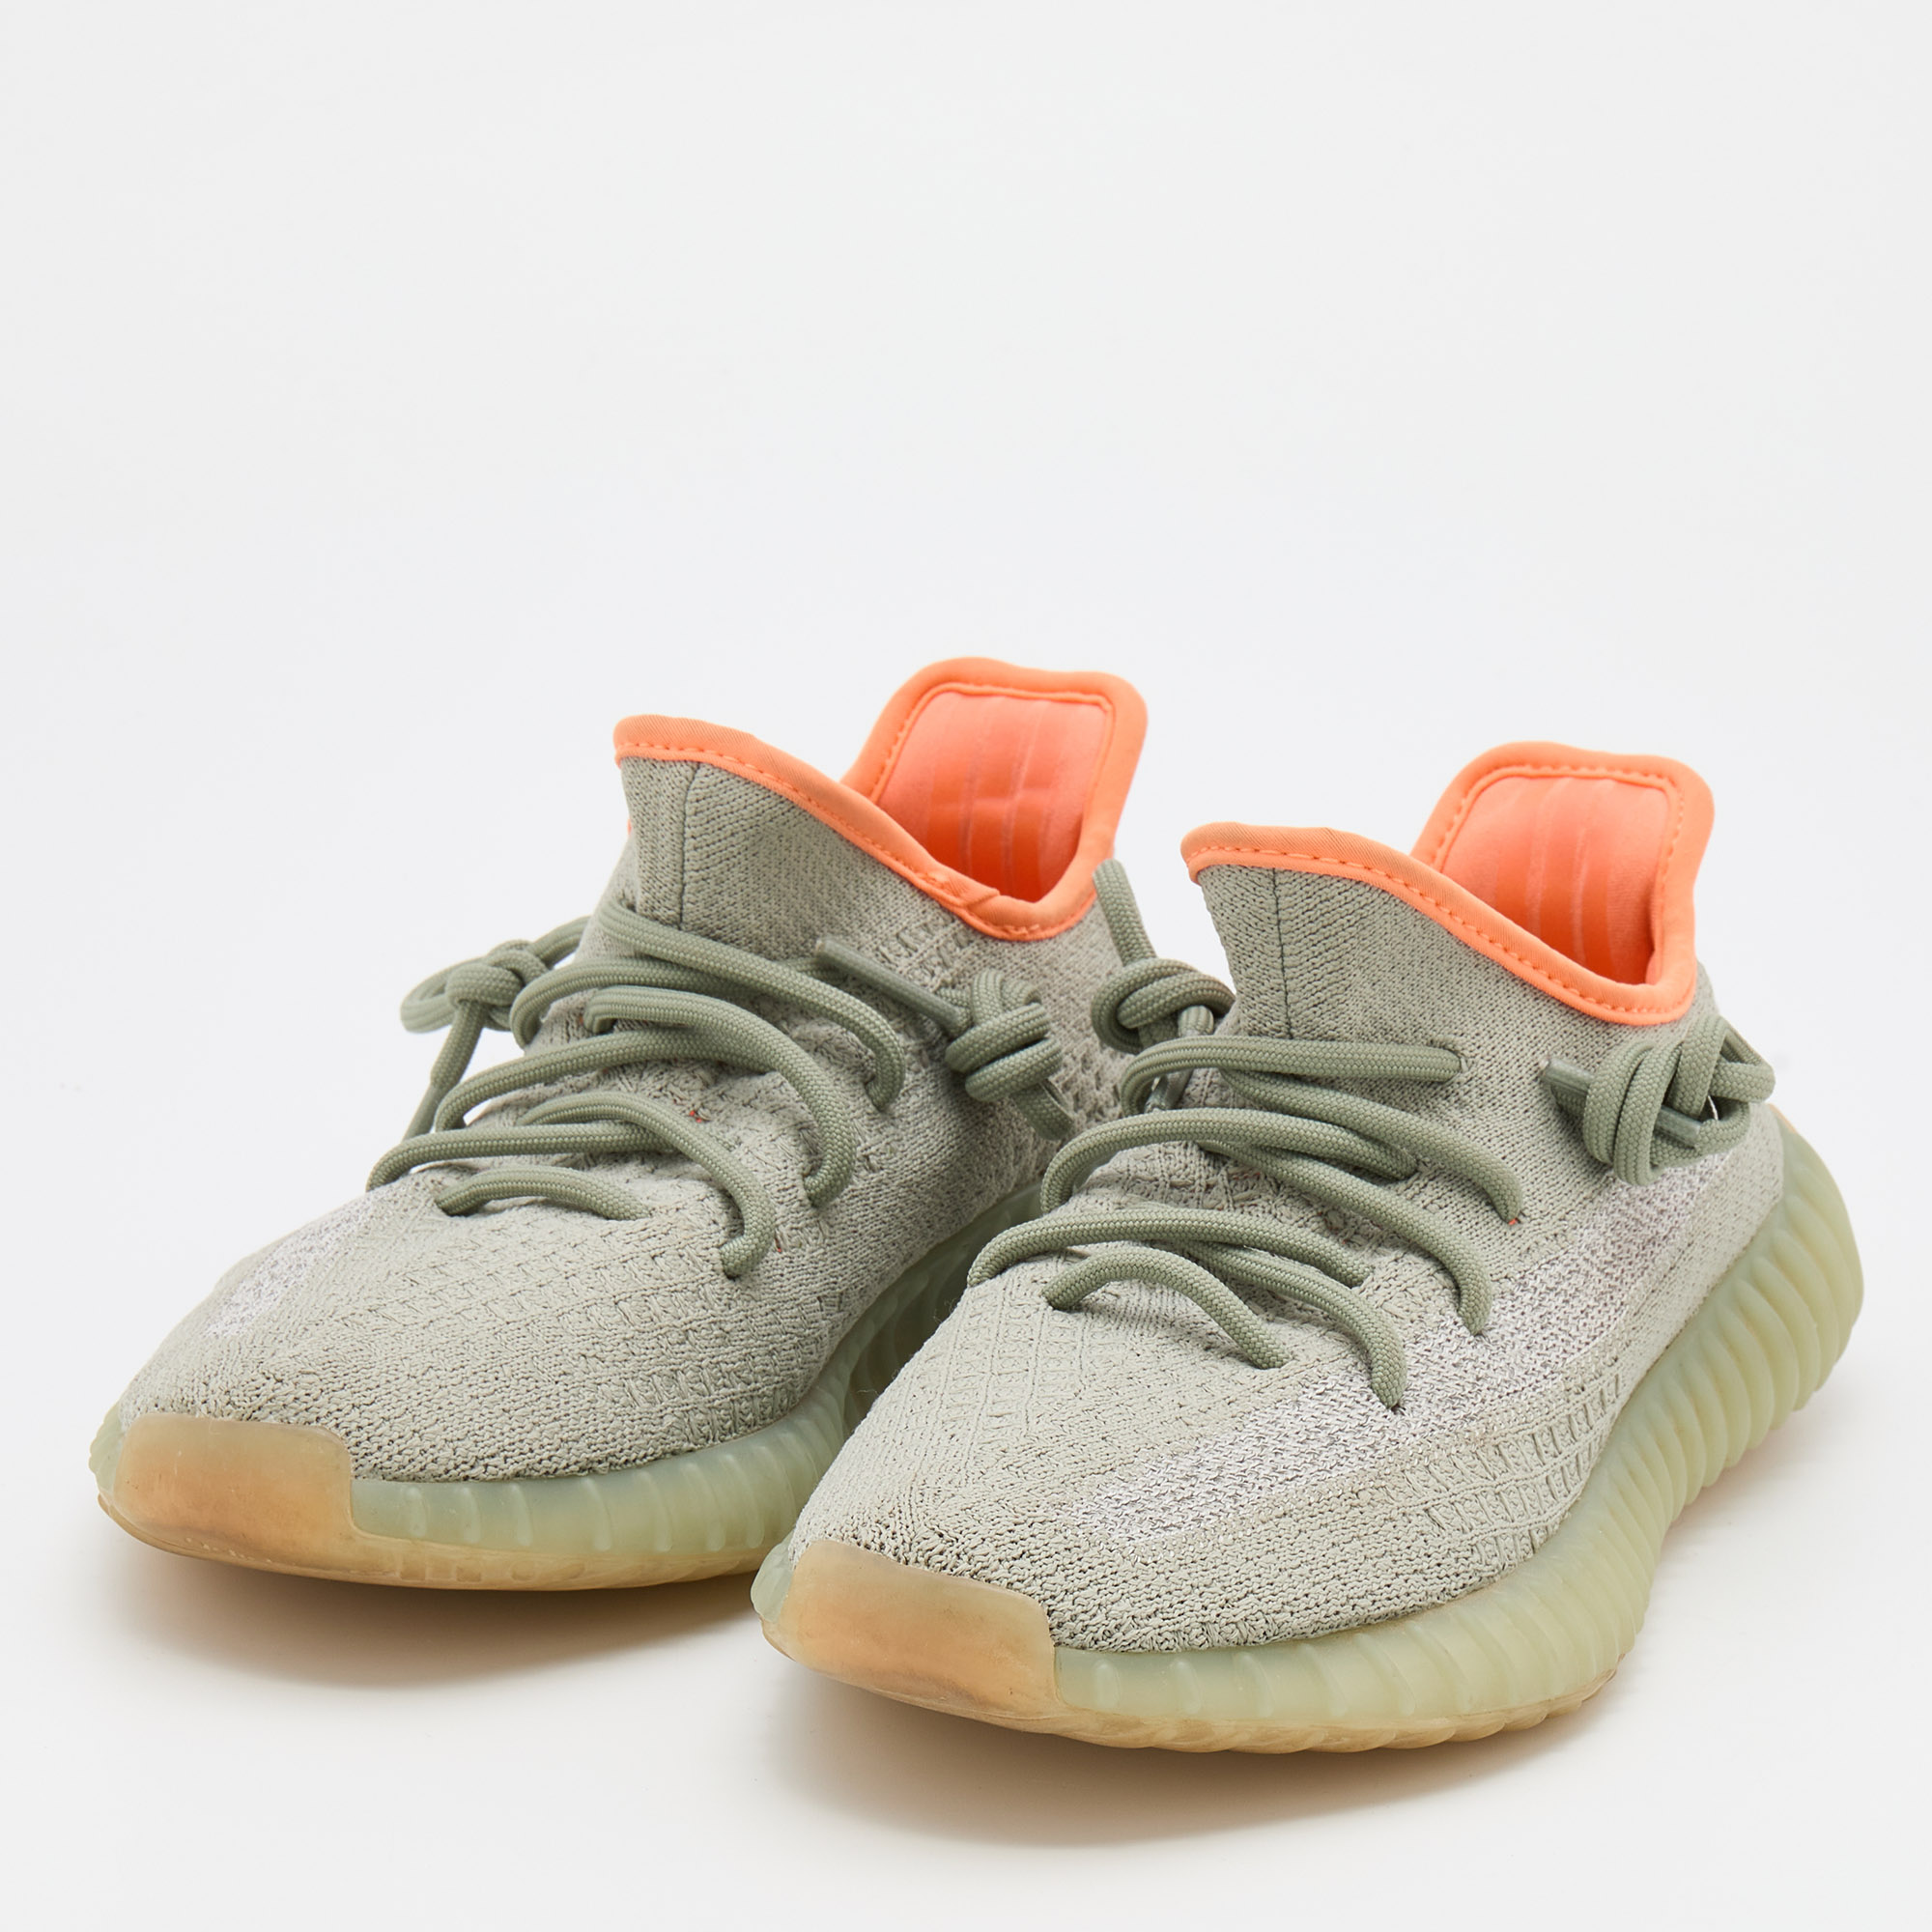 

Yeezy x Adidas Green/Grey Knit Fabric Boost 350 V2 Desert Sage Sneakers Size 36 2/3